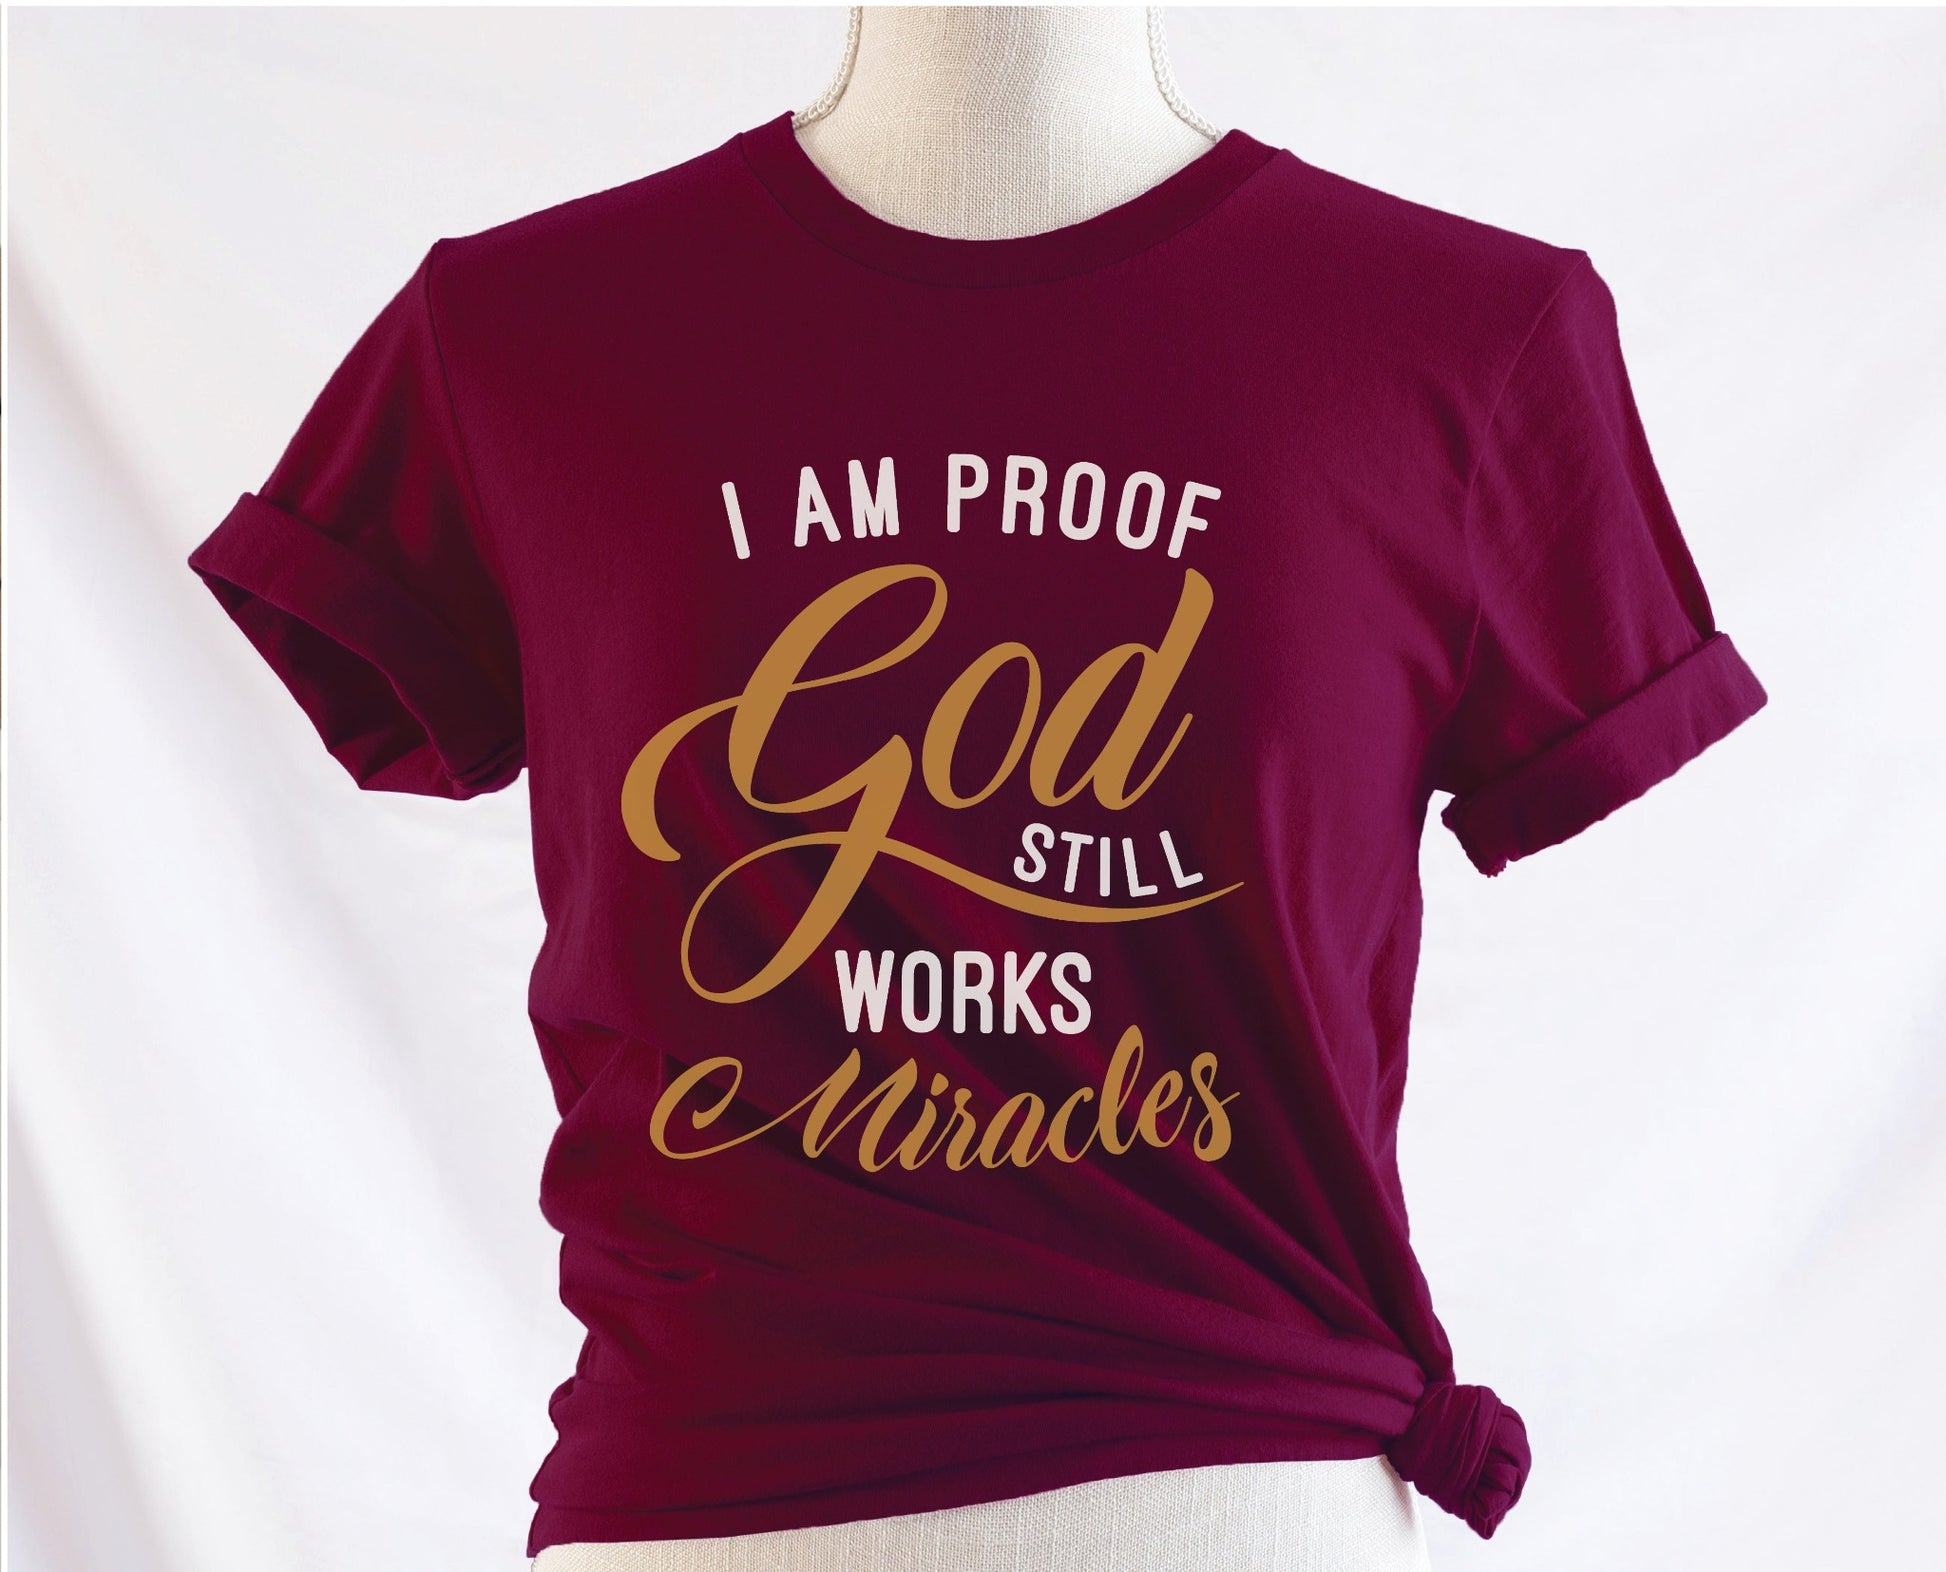 I am proof God still works miracles Christian aesthetic testimony design printed in white and gold on soft maroon unisex t-shirt for women